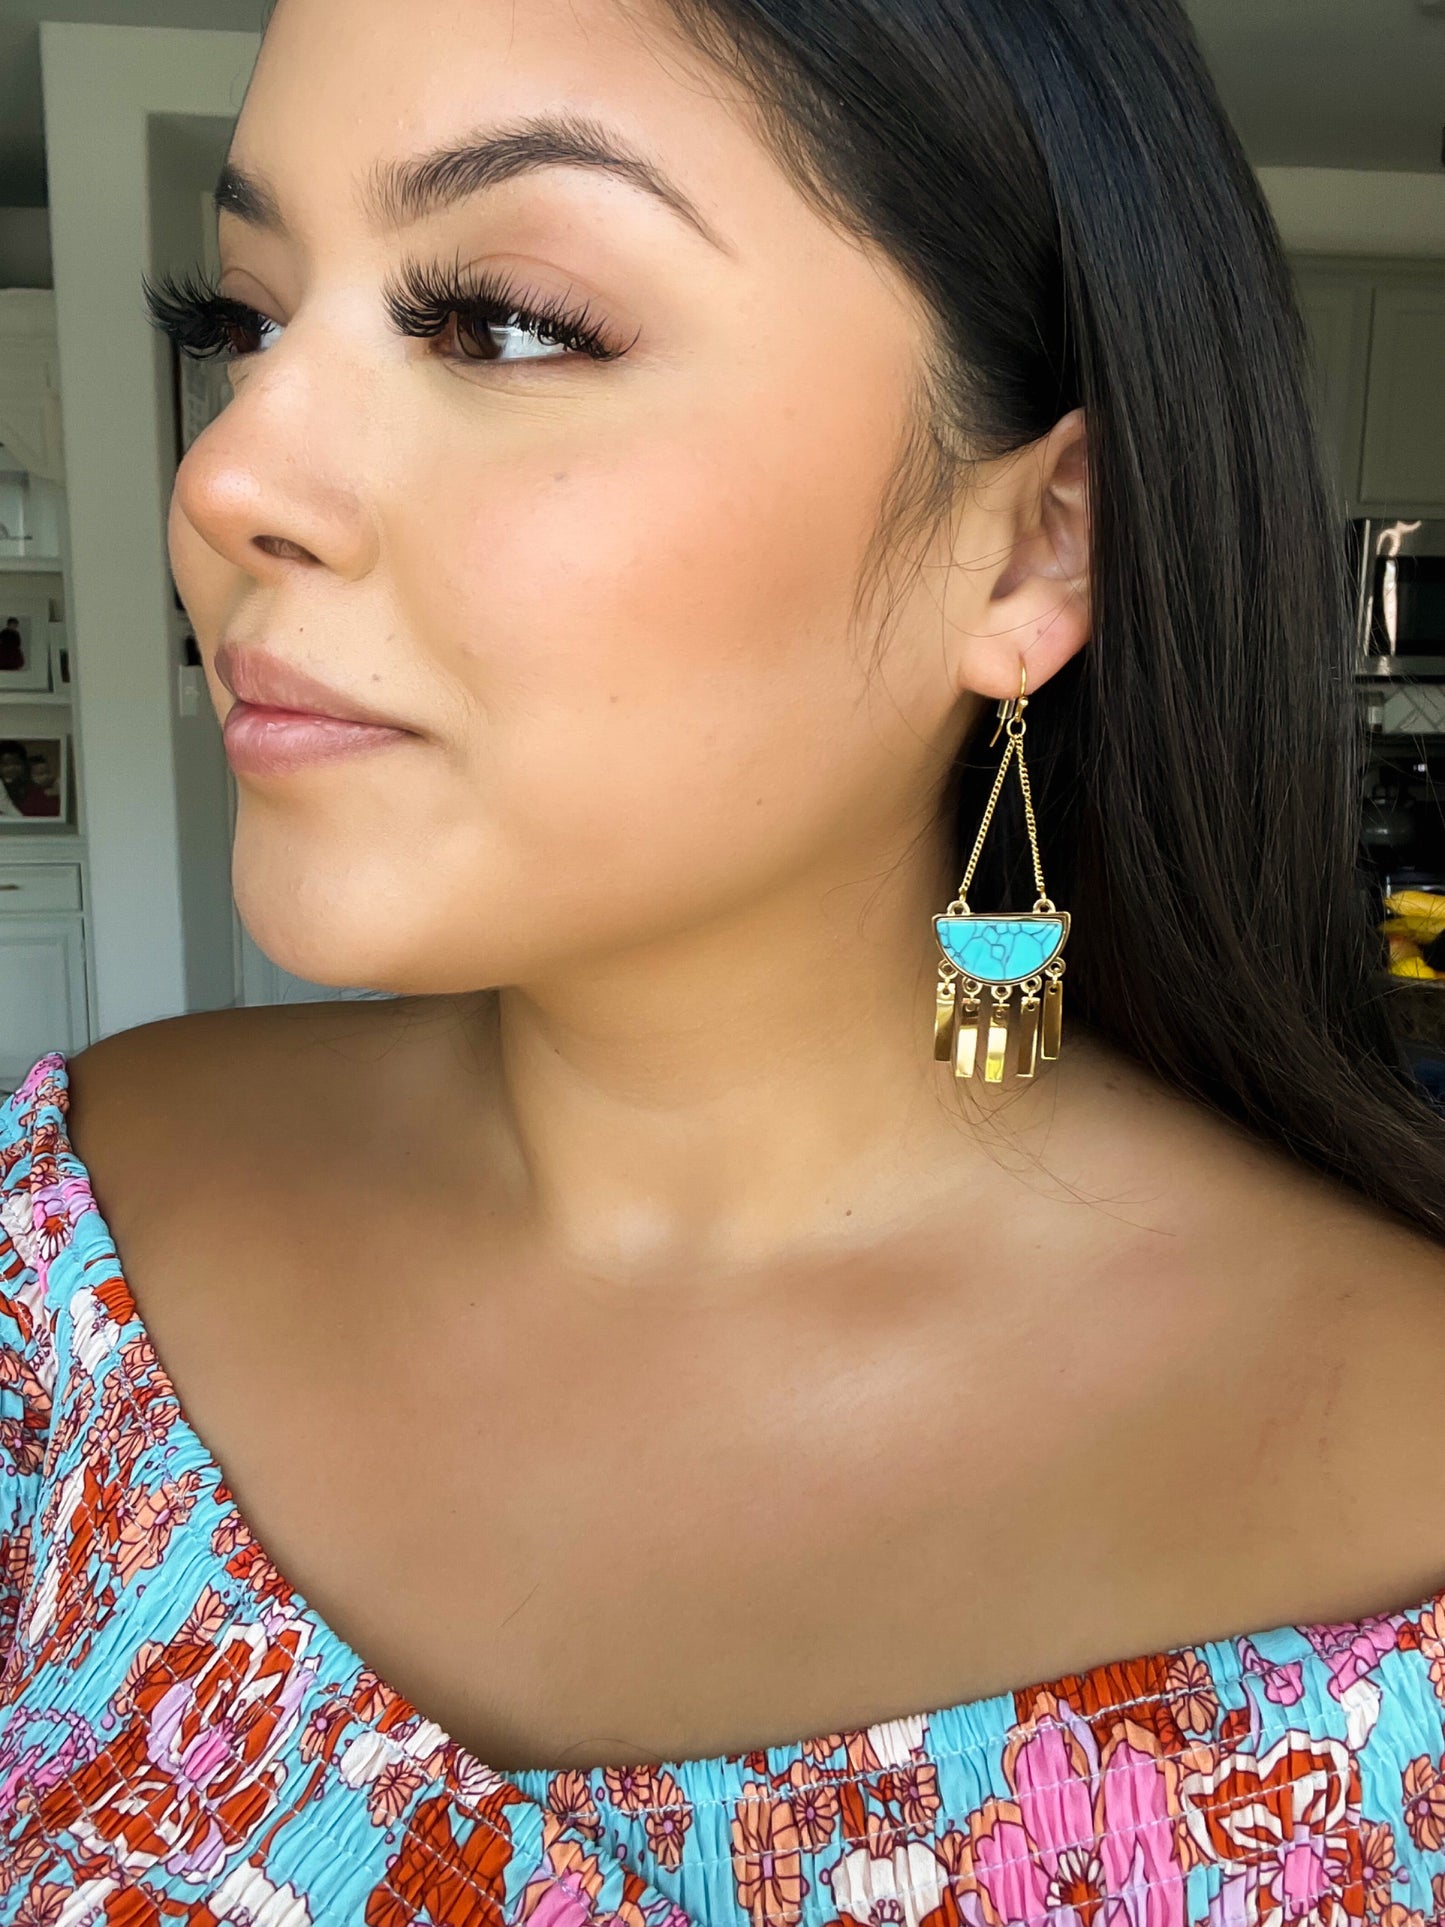 Bianca Collection - Turquoise Earrings